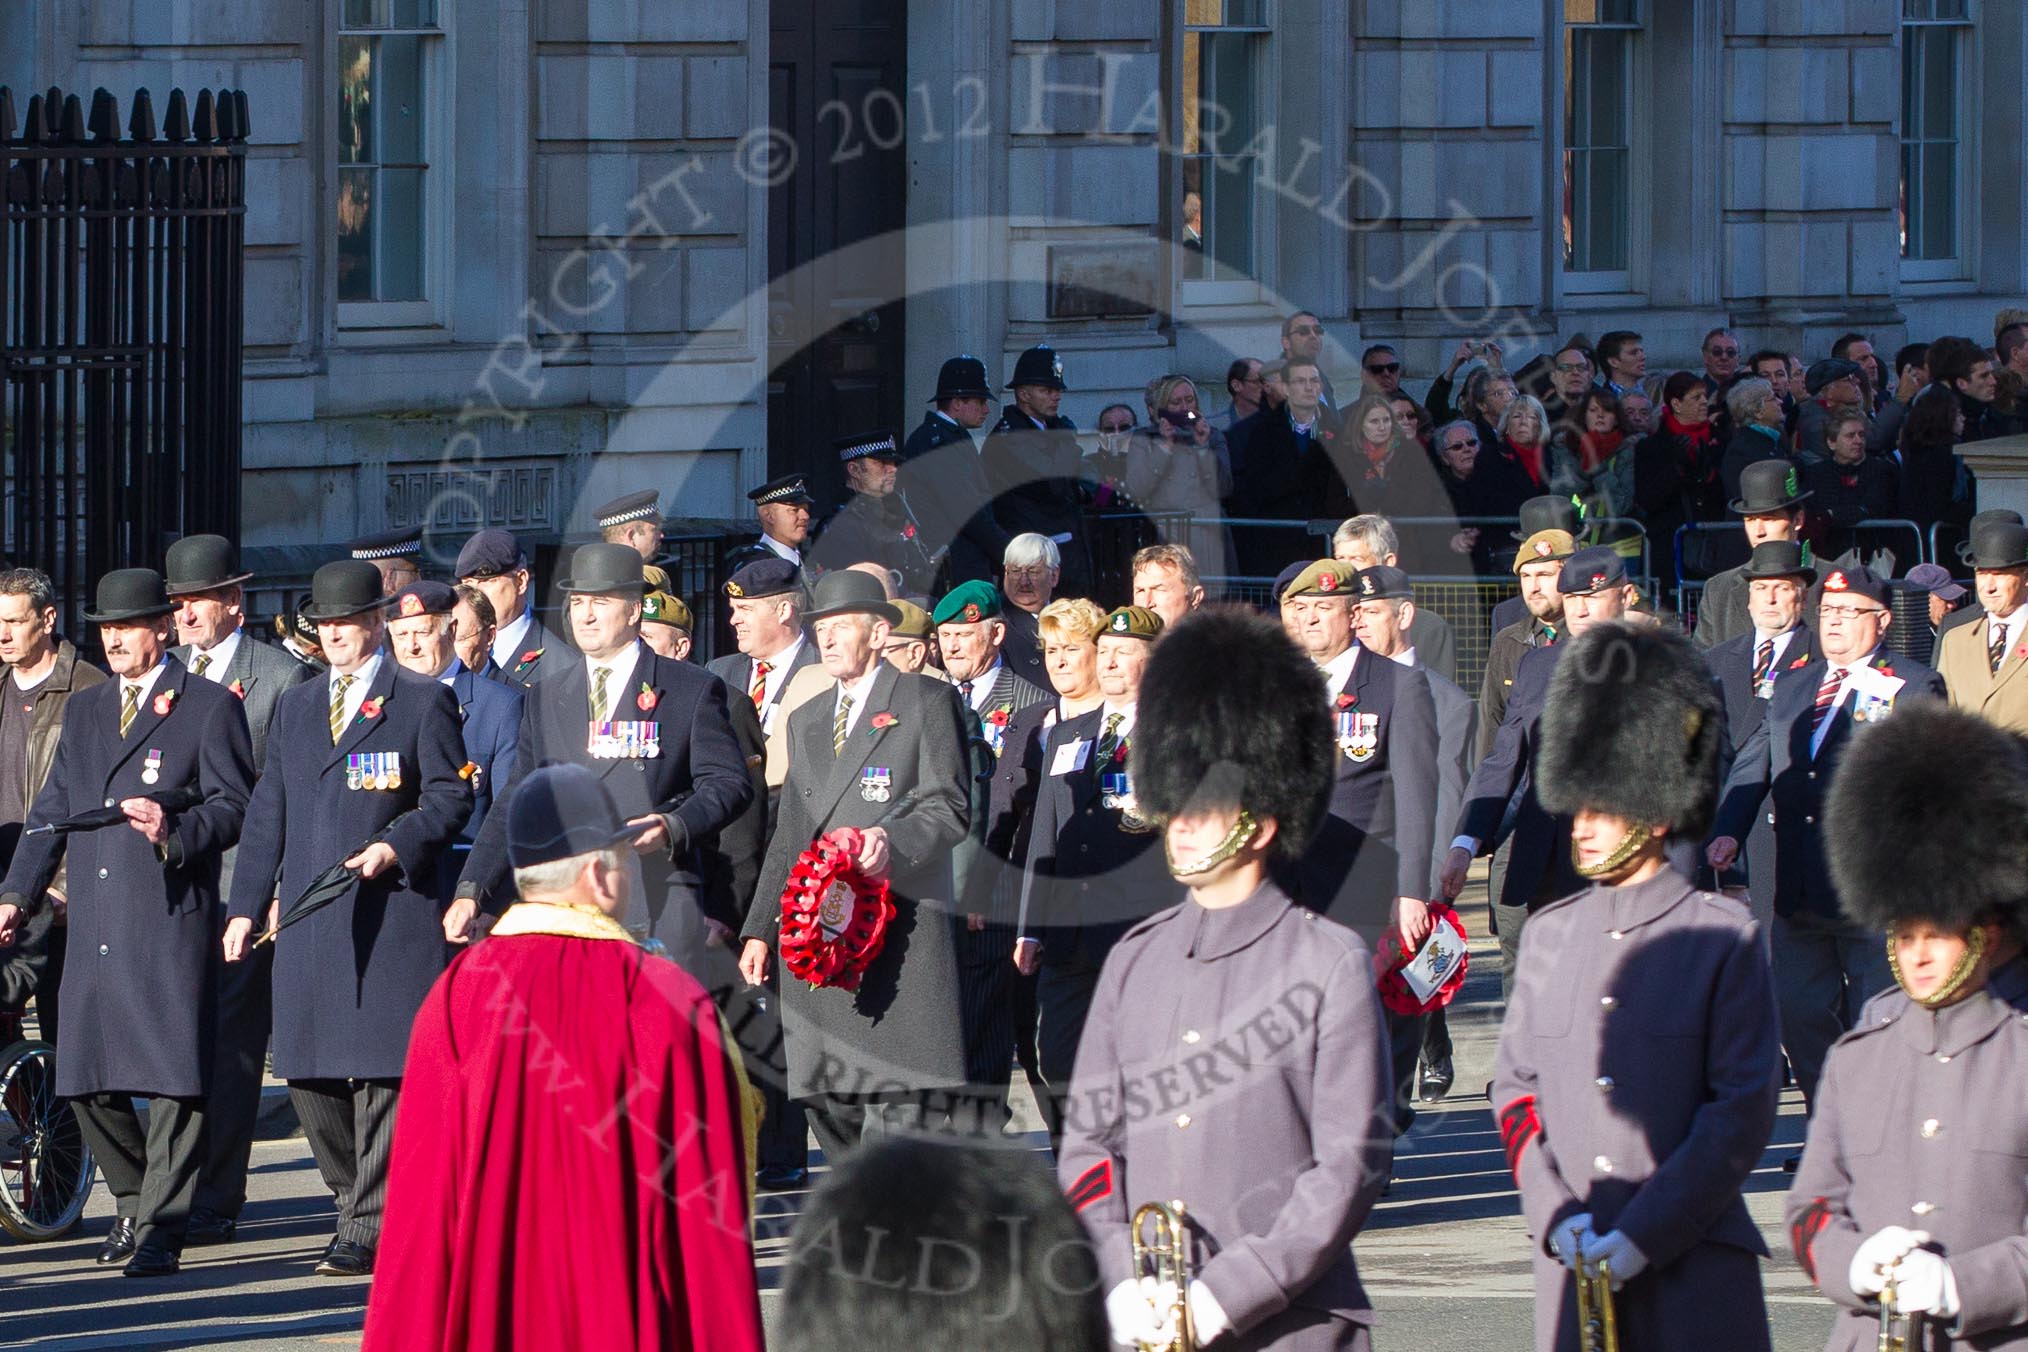 Remembrance Sunday 2012 Cenotaph March Past: Group A7 - Royal Northumberland Fusiliers  and A8 - 
The Duke of Lancaster's Regimental Association..
Whitehall, Cenotaph,
London SW1,

United Kingdom,
on 11 November 2012 at 11:49, image #584